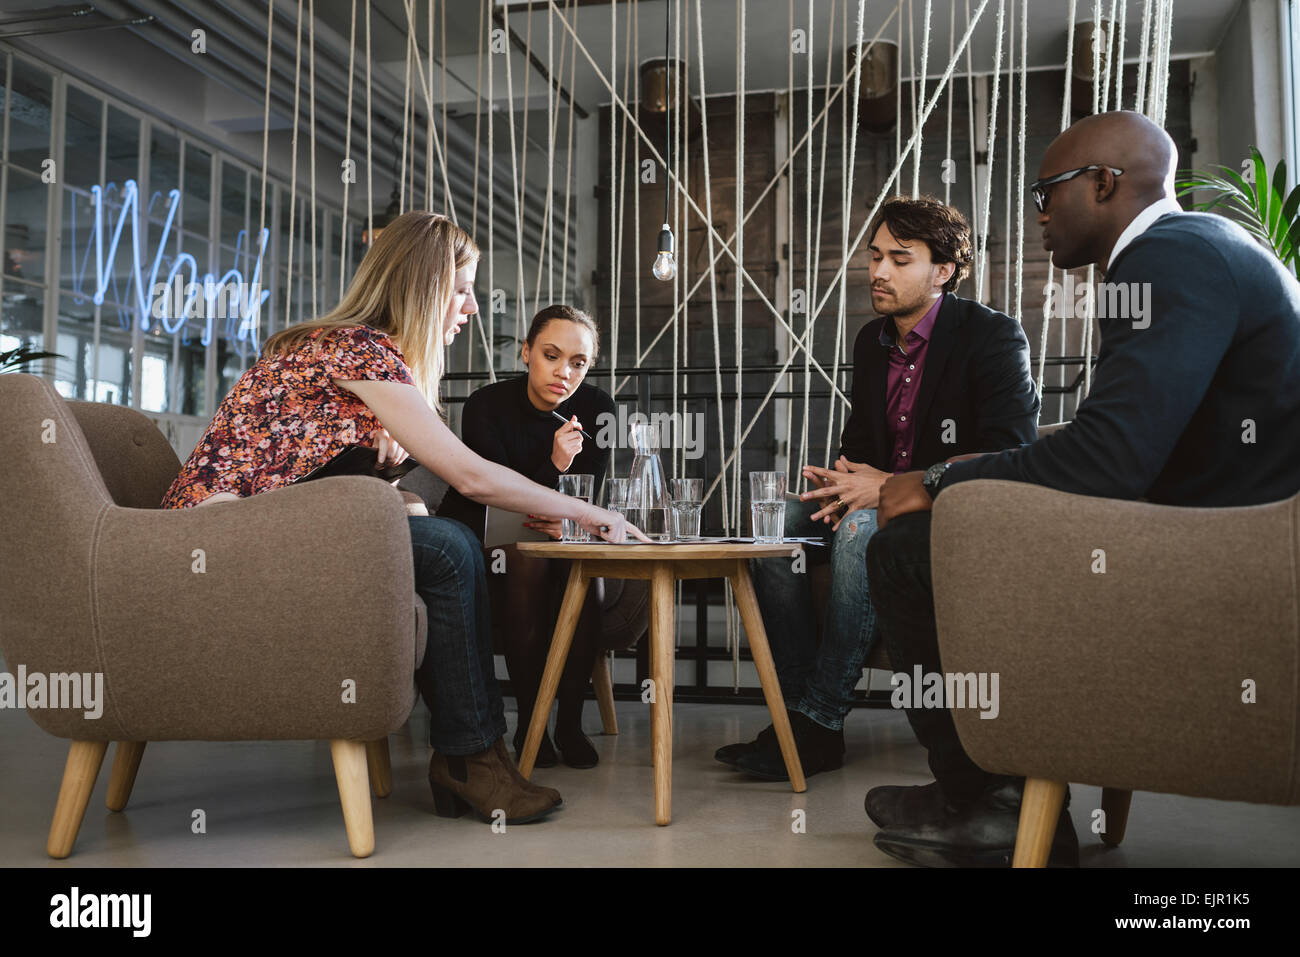 Diverse group of executives meeting in office sharing creative ideas. Young people having a meeting in lobby. Stock Photo